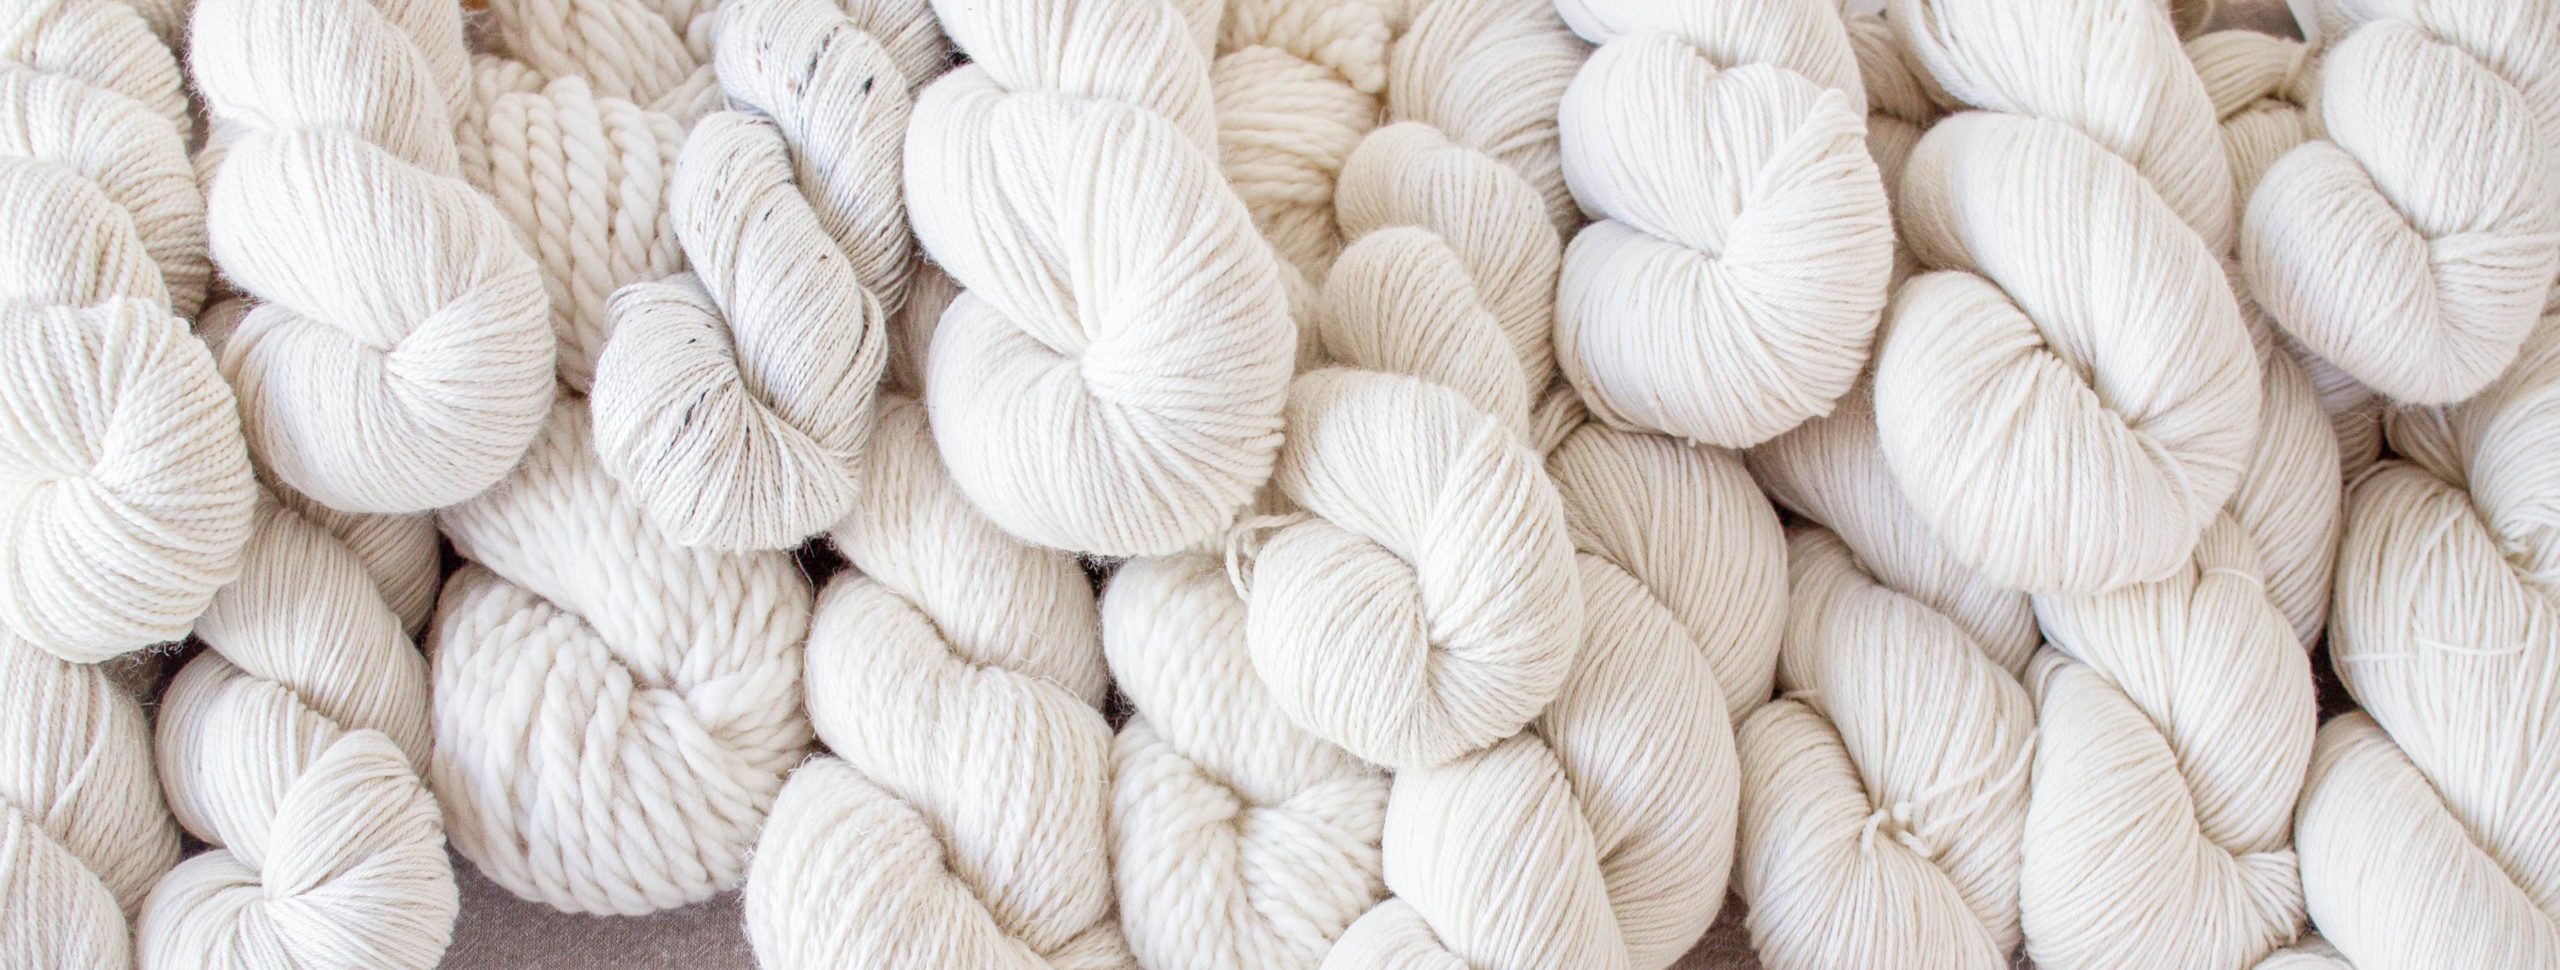 Where to buy undyed yarn  A blank canvas for your next dyeing project